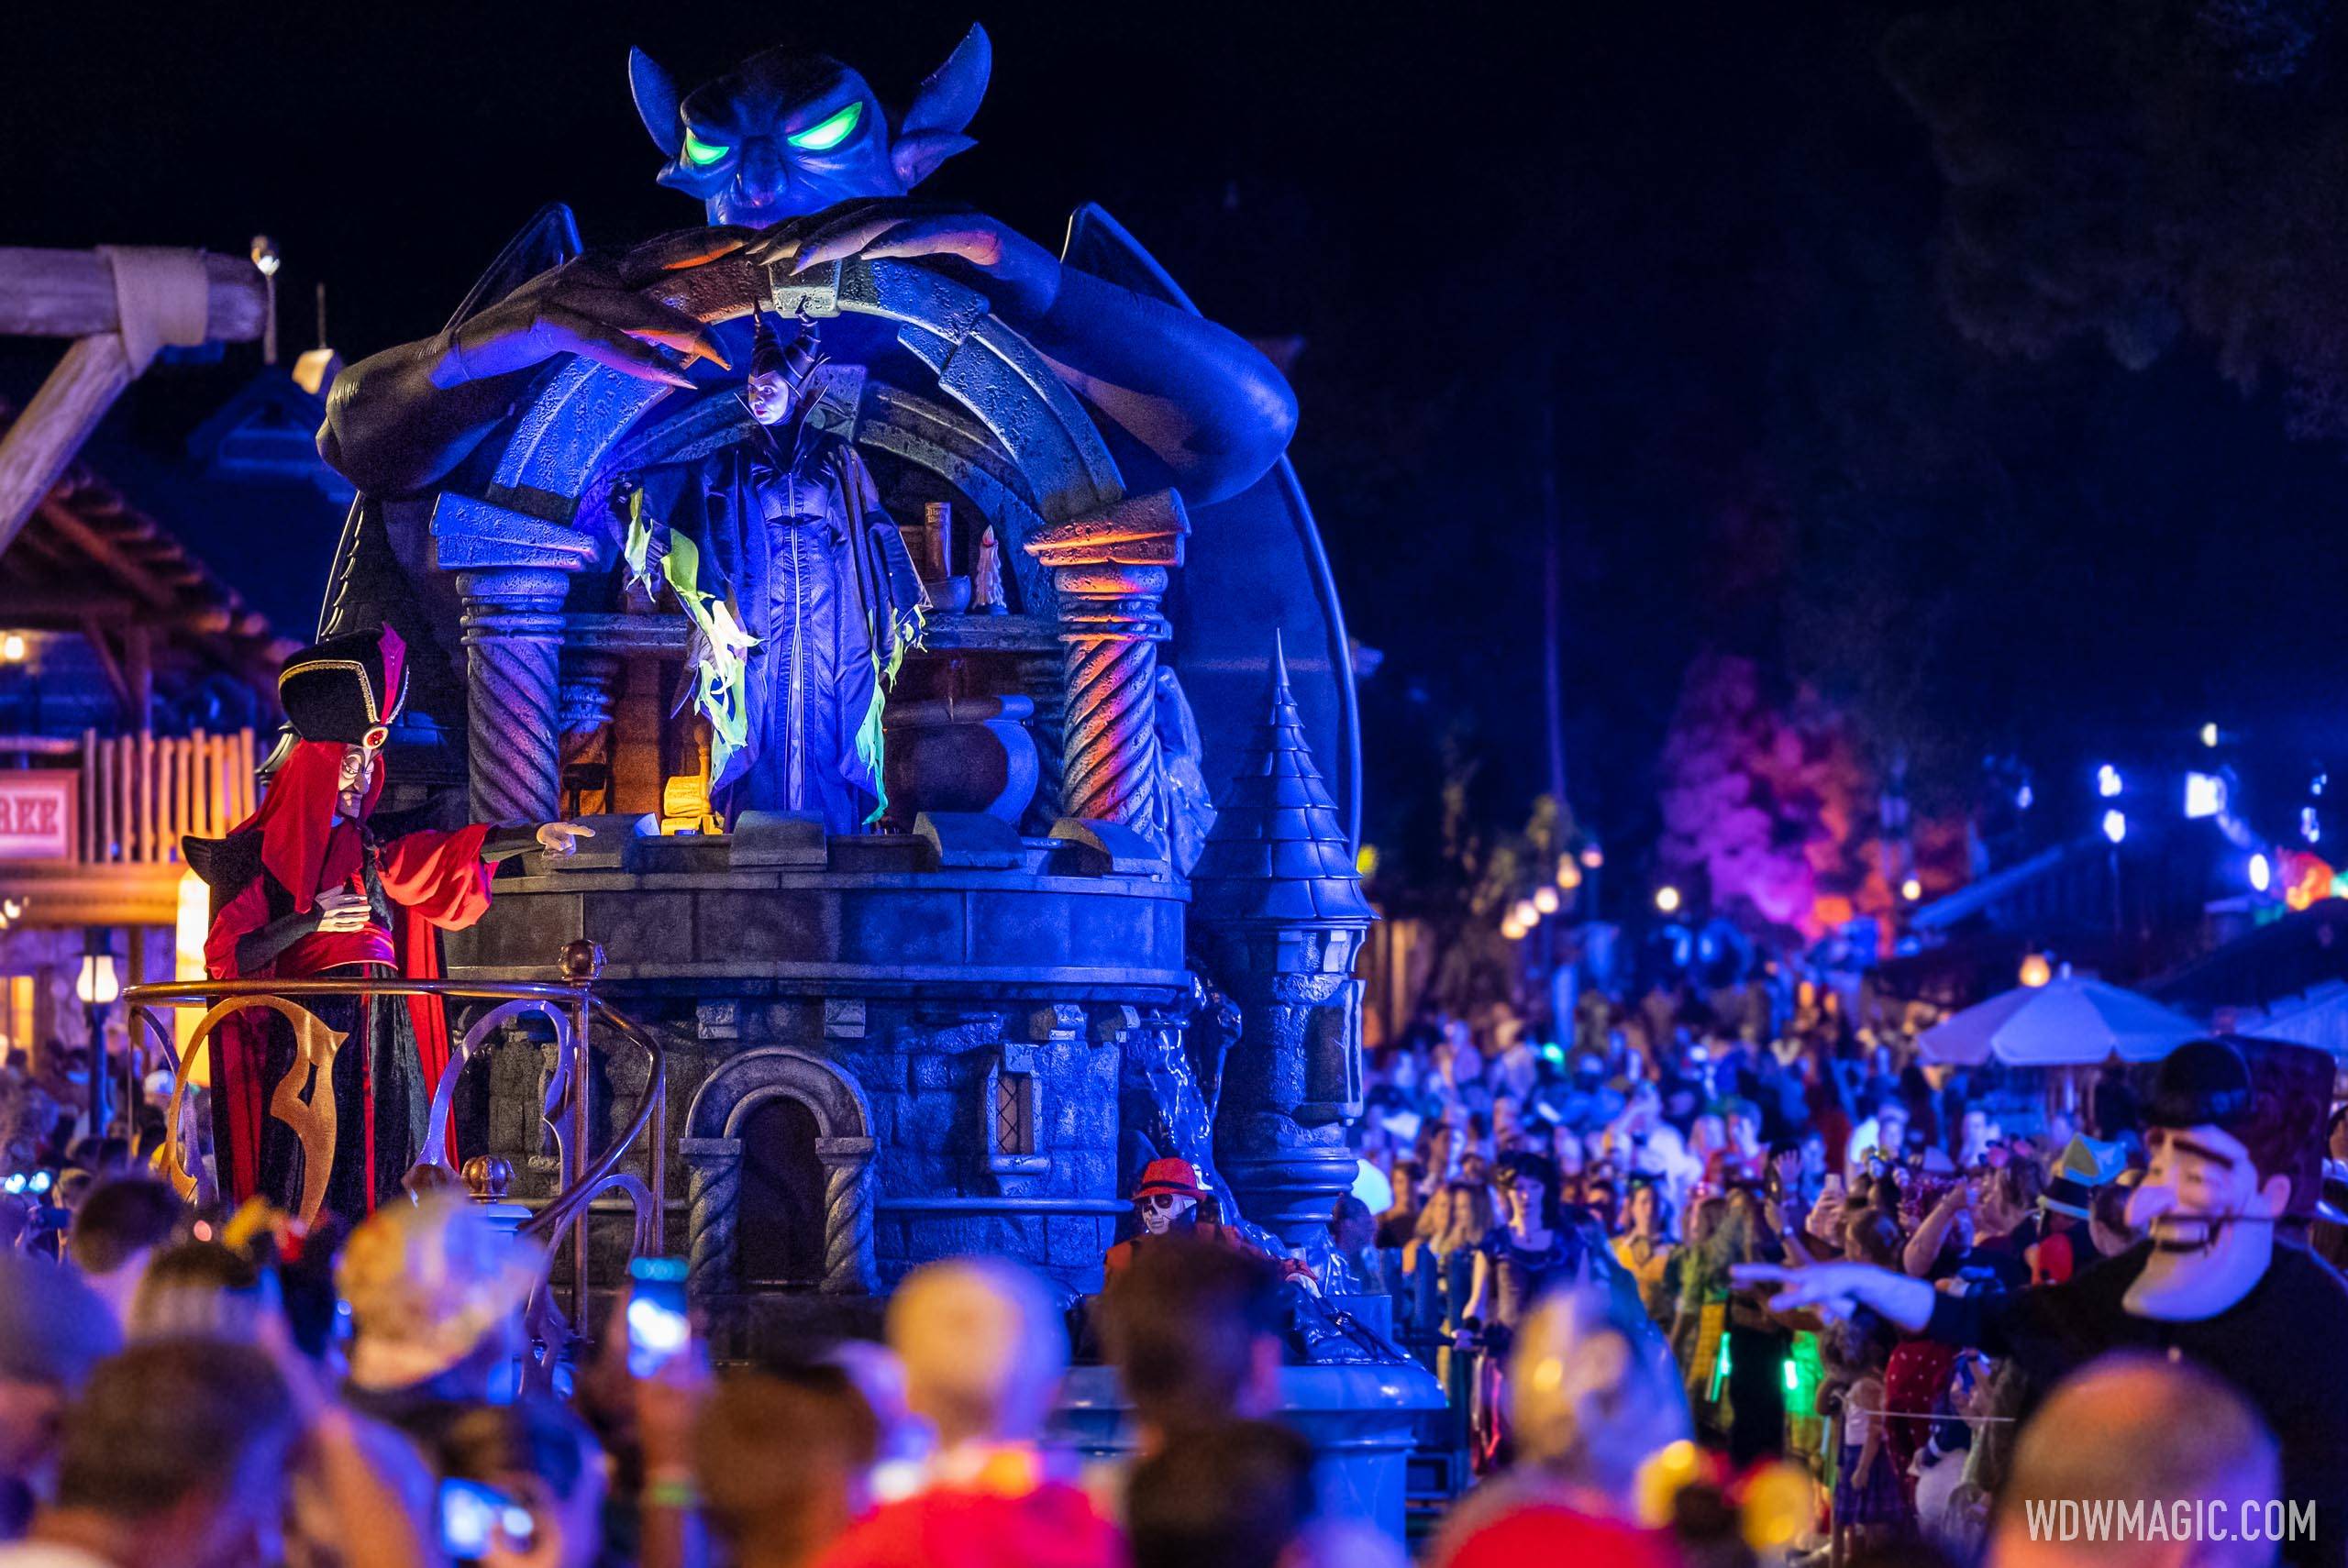 Mickey's Boo-To-You Halloween Parade - Malificent